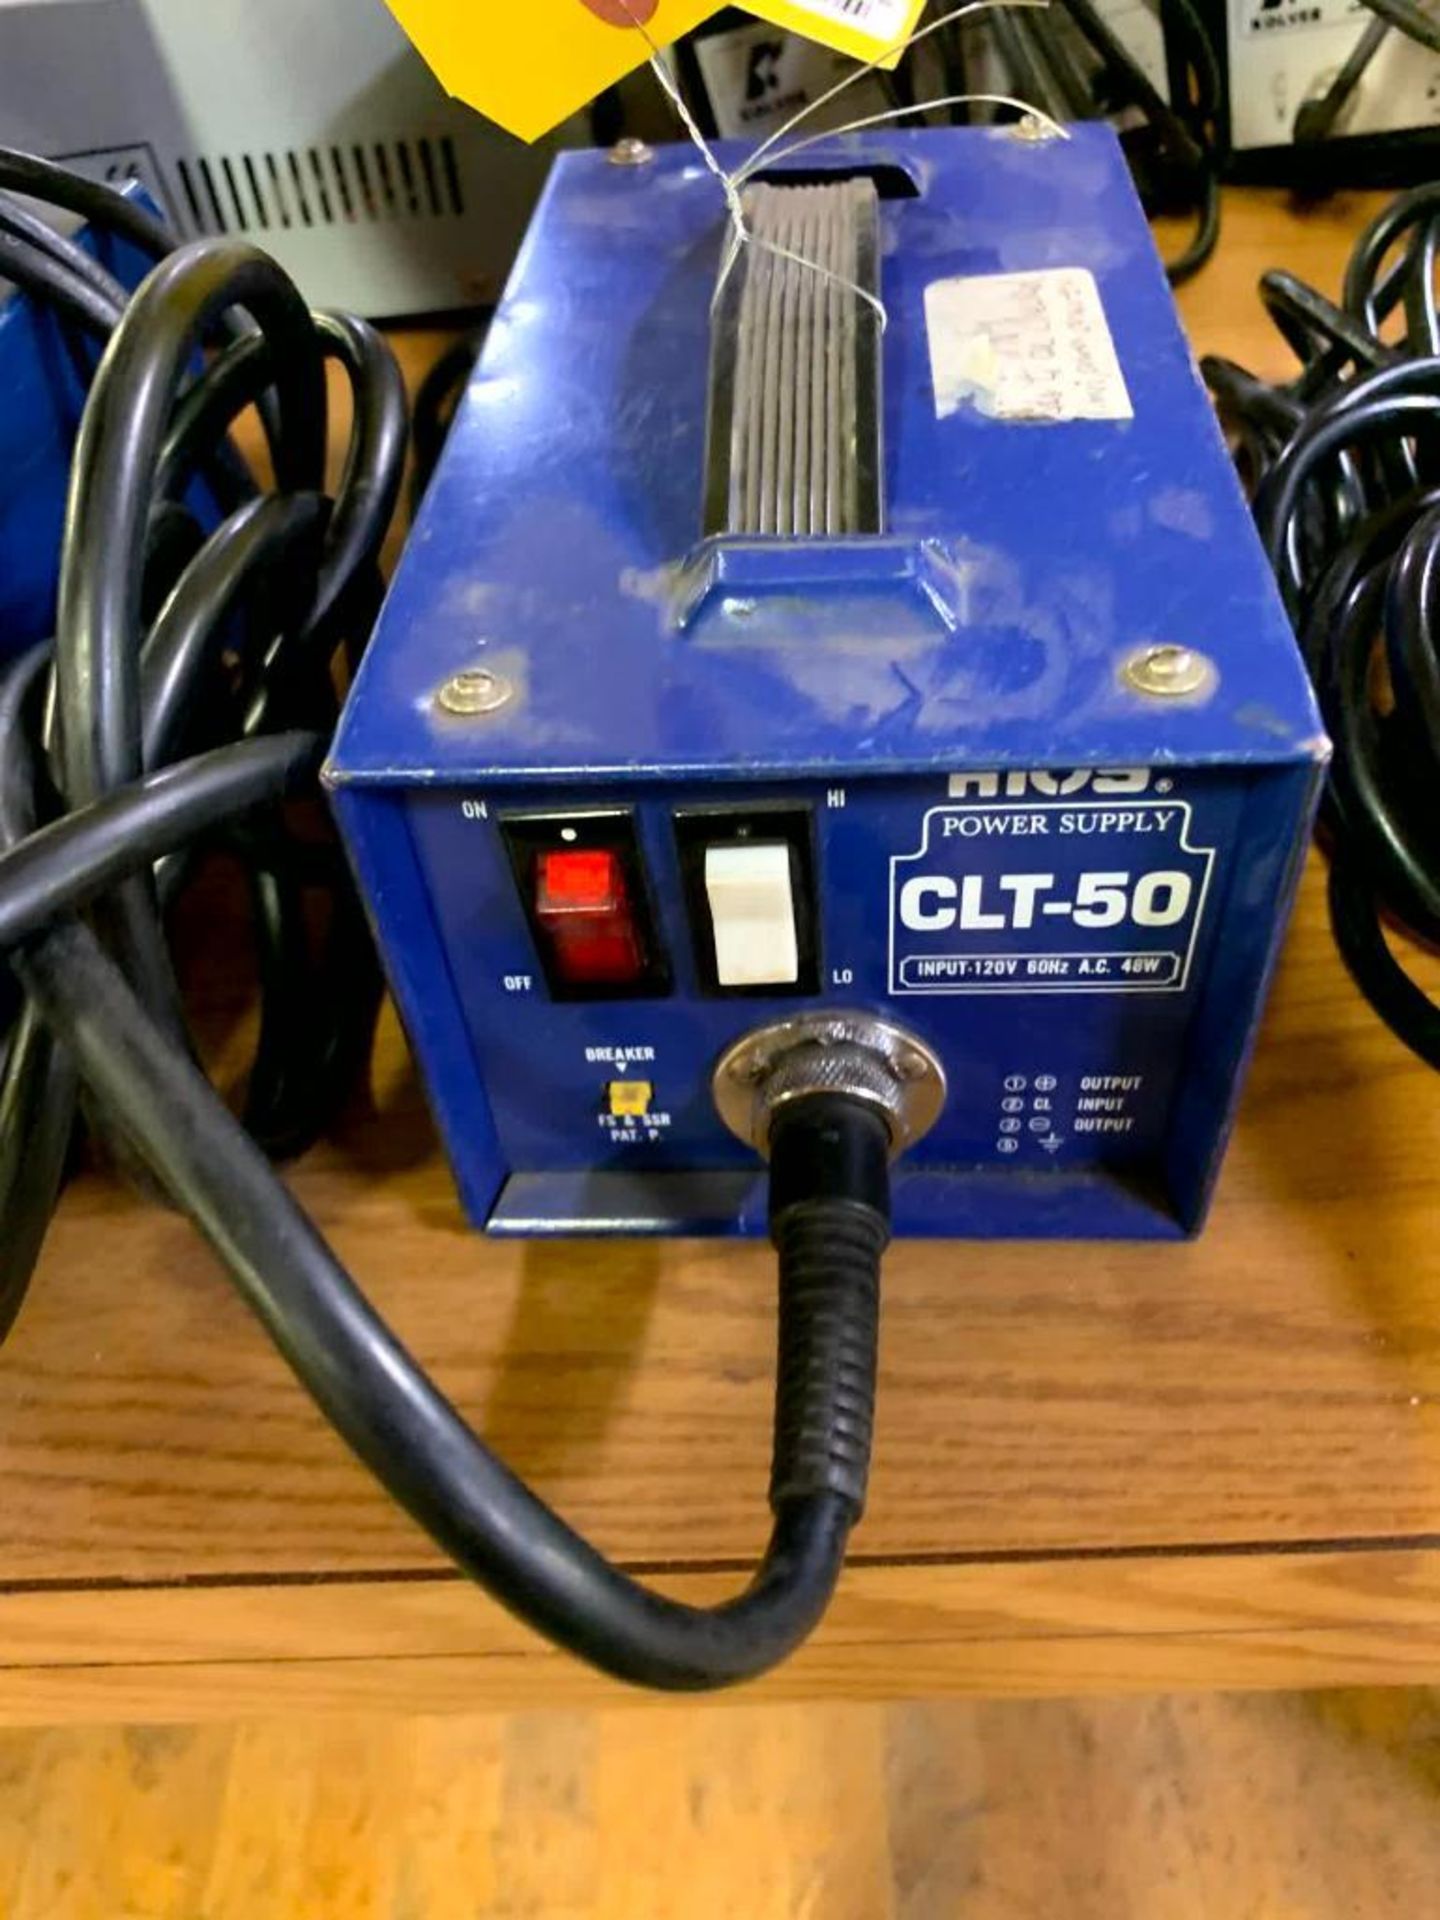 H1OS Power Supply for Torque Screwdrivers